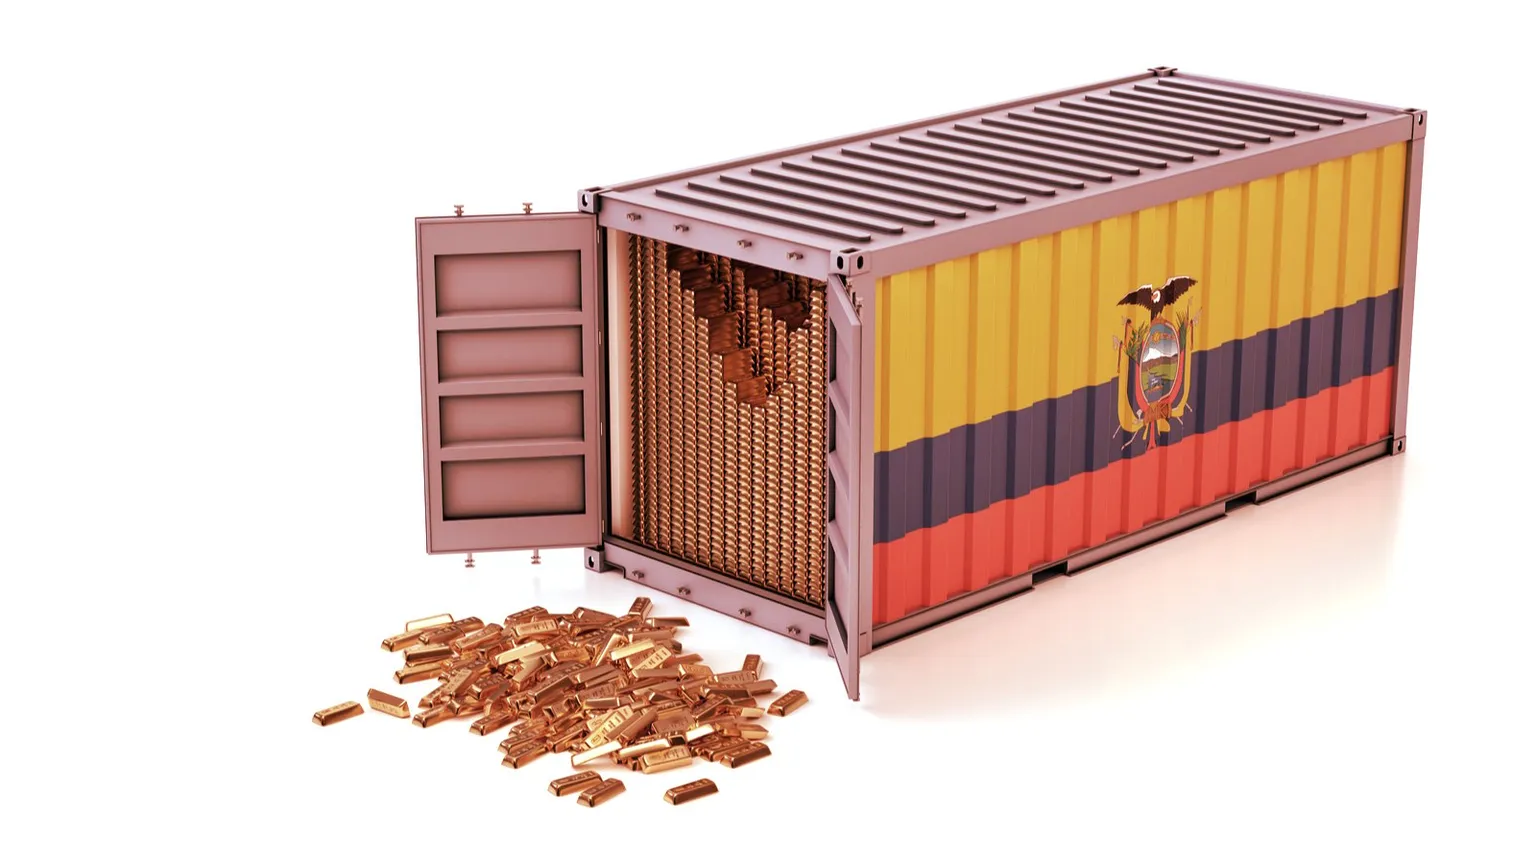 Freight Container with Ecuador flag filled with Gold bars. Image: Shutterstock